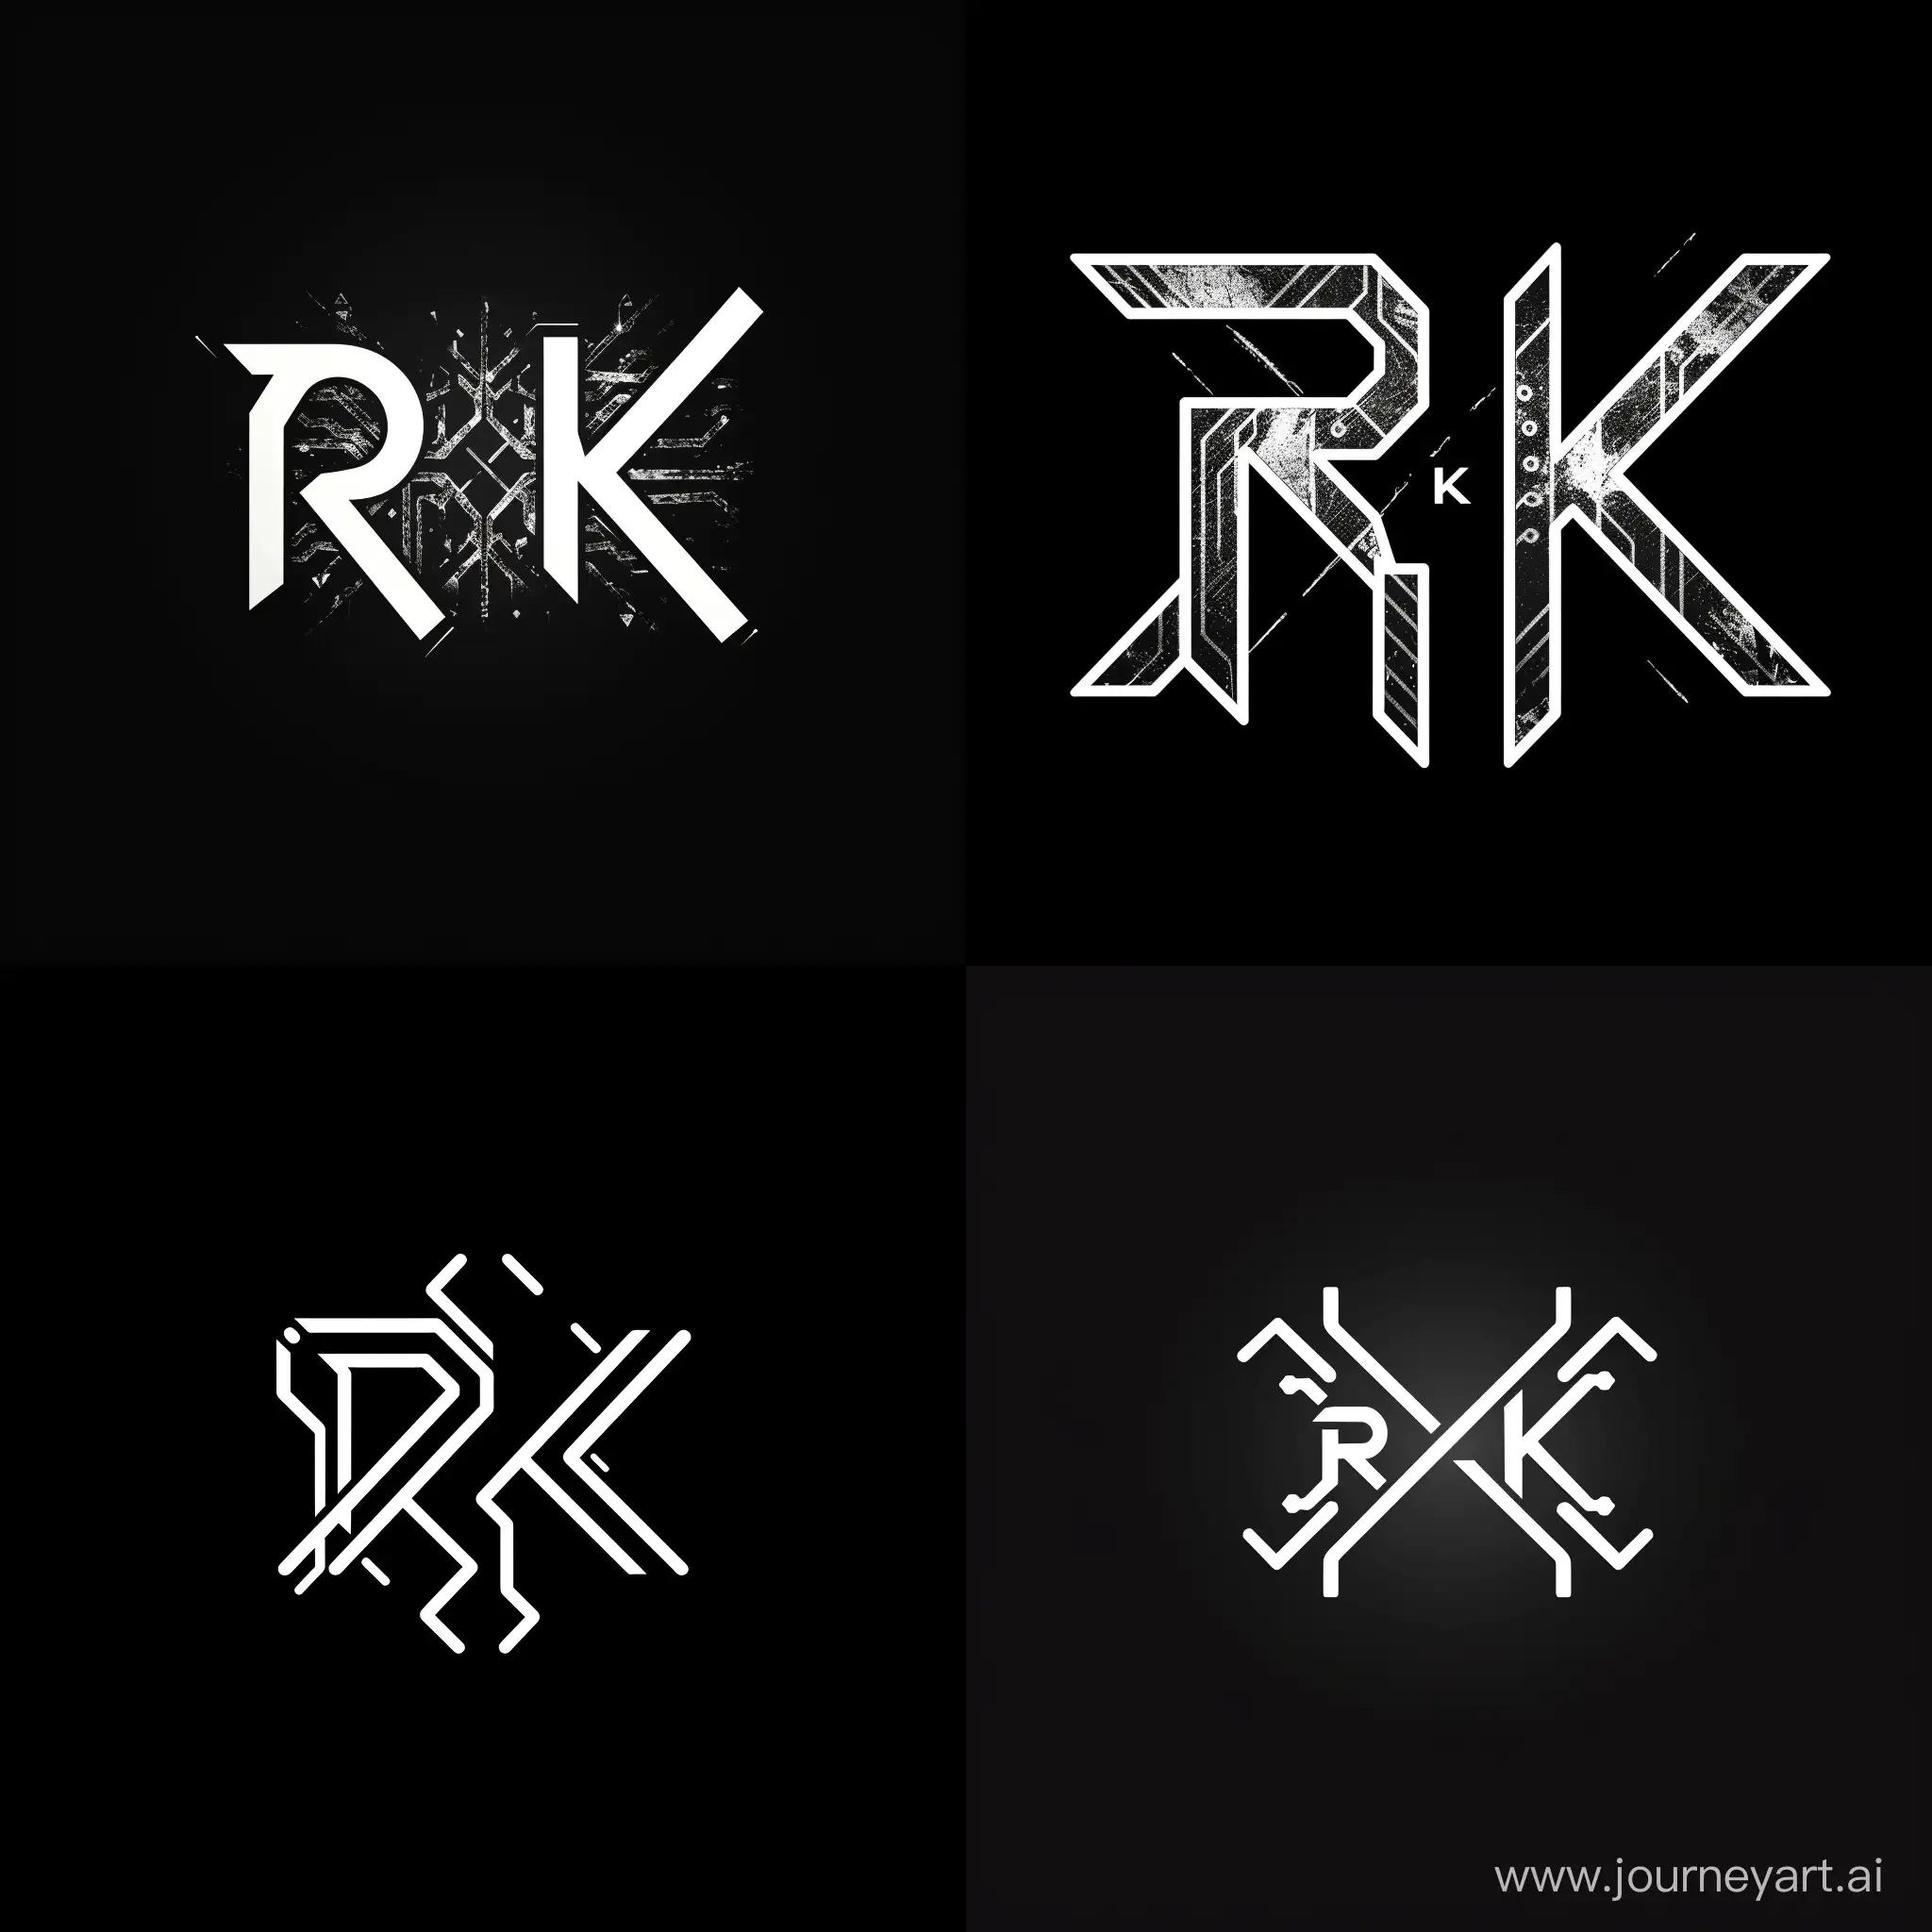 Logo, art. The logo consists of two stylised crossed letters R and K. Theme Artificial Intelligence. The background is black, the letters are white. RK should be clearly visible but veiled